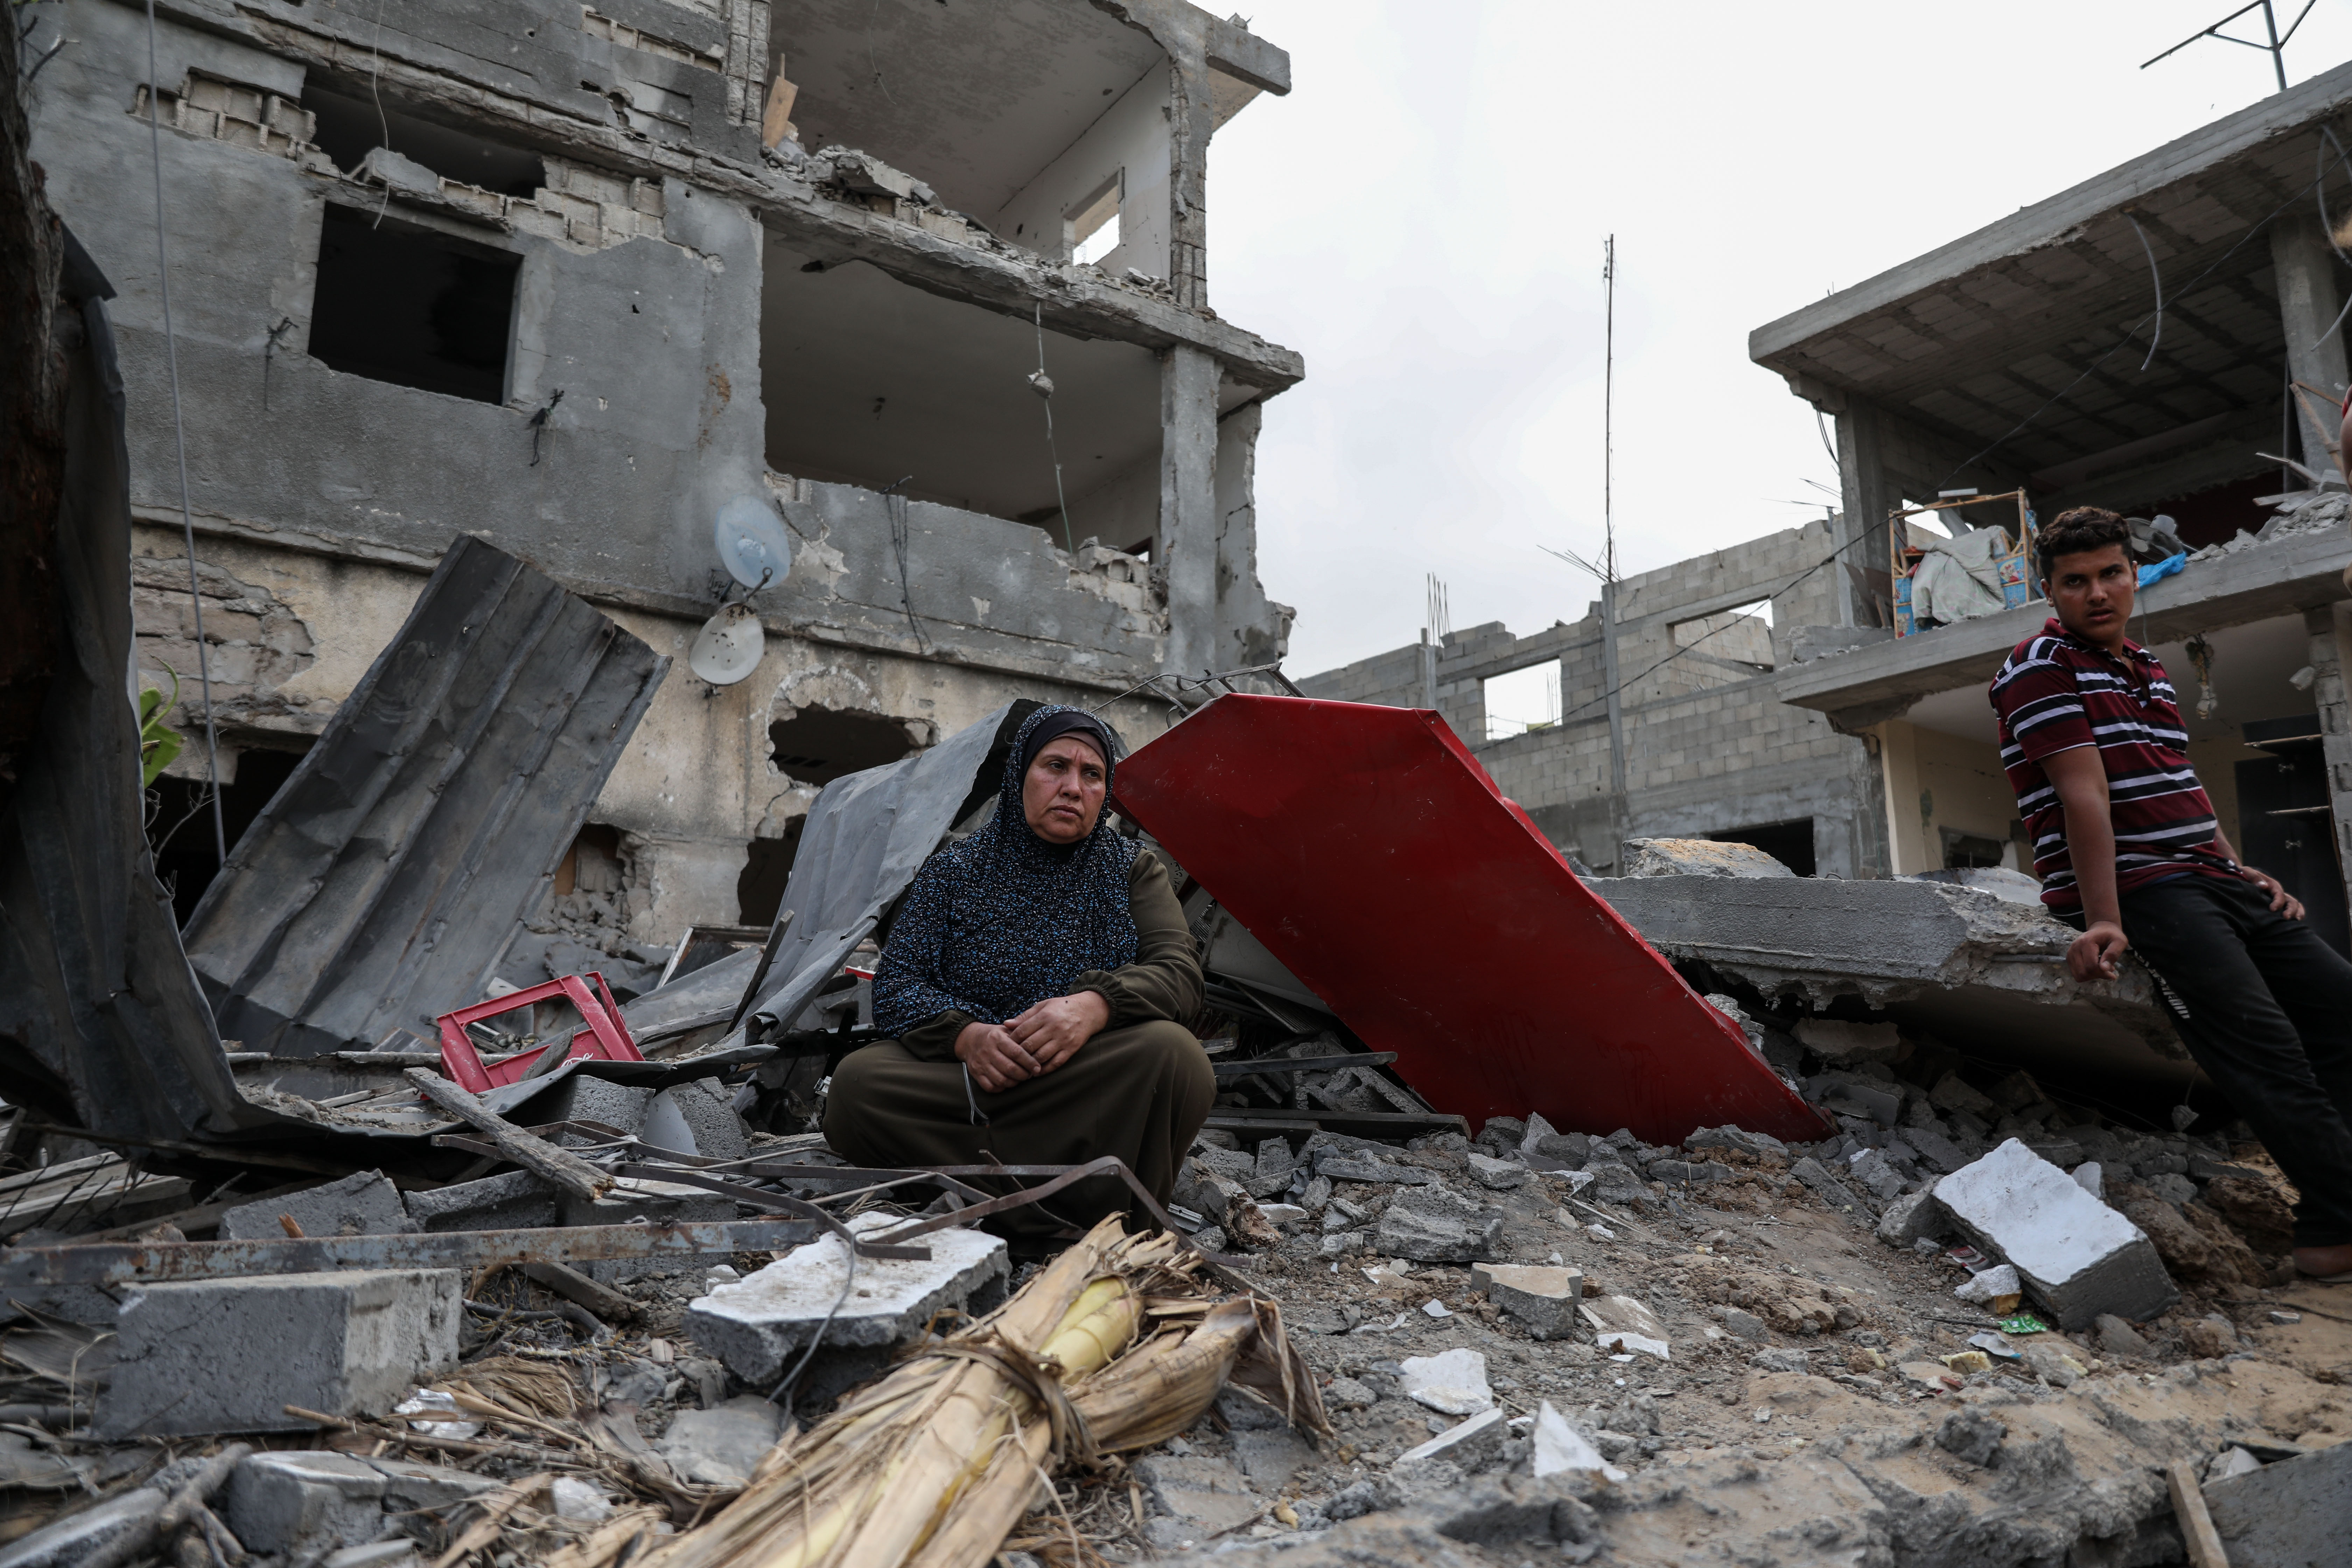 A woman sits in the demolished ruins of her home, which had been bombed by an Israeli air strike